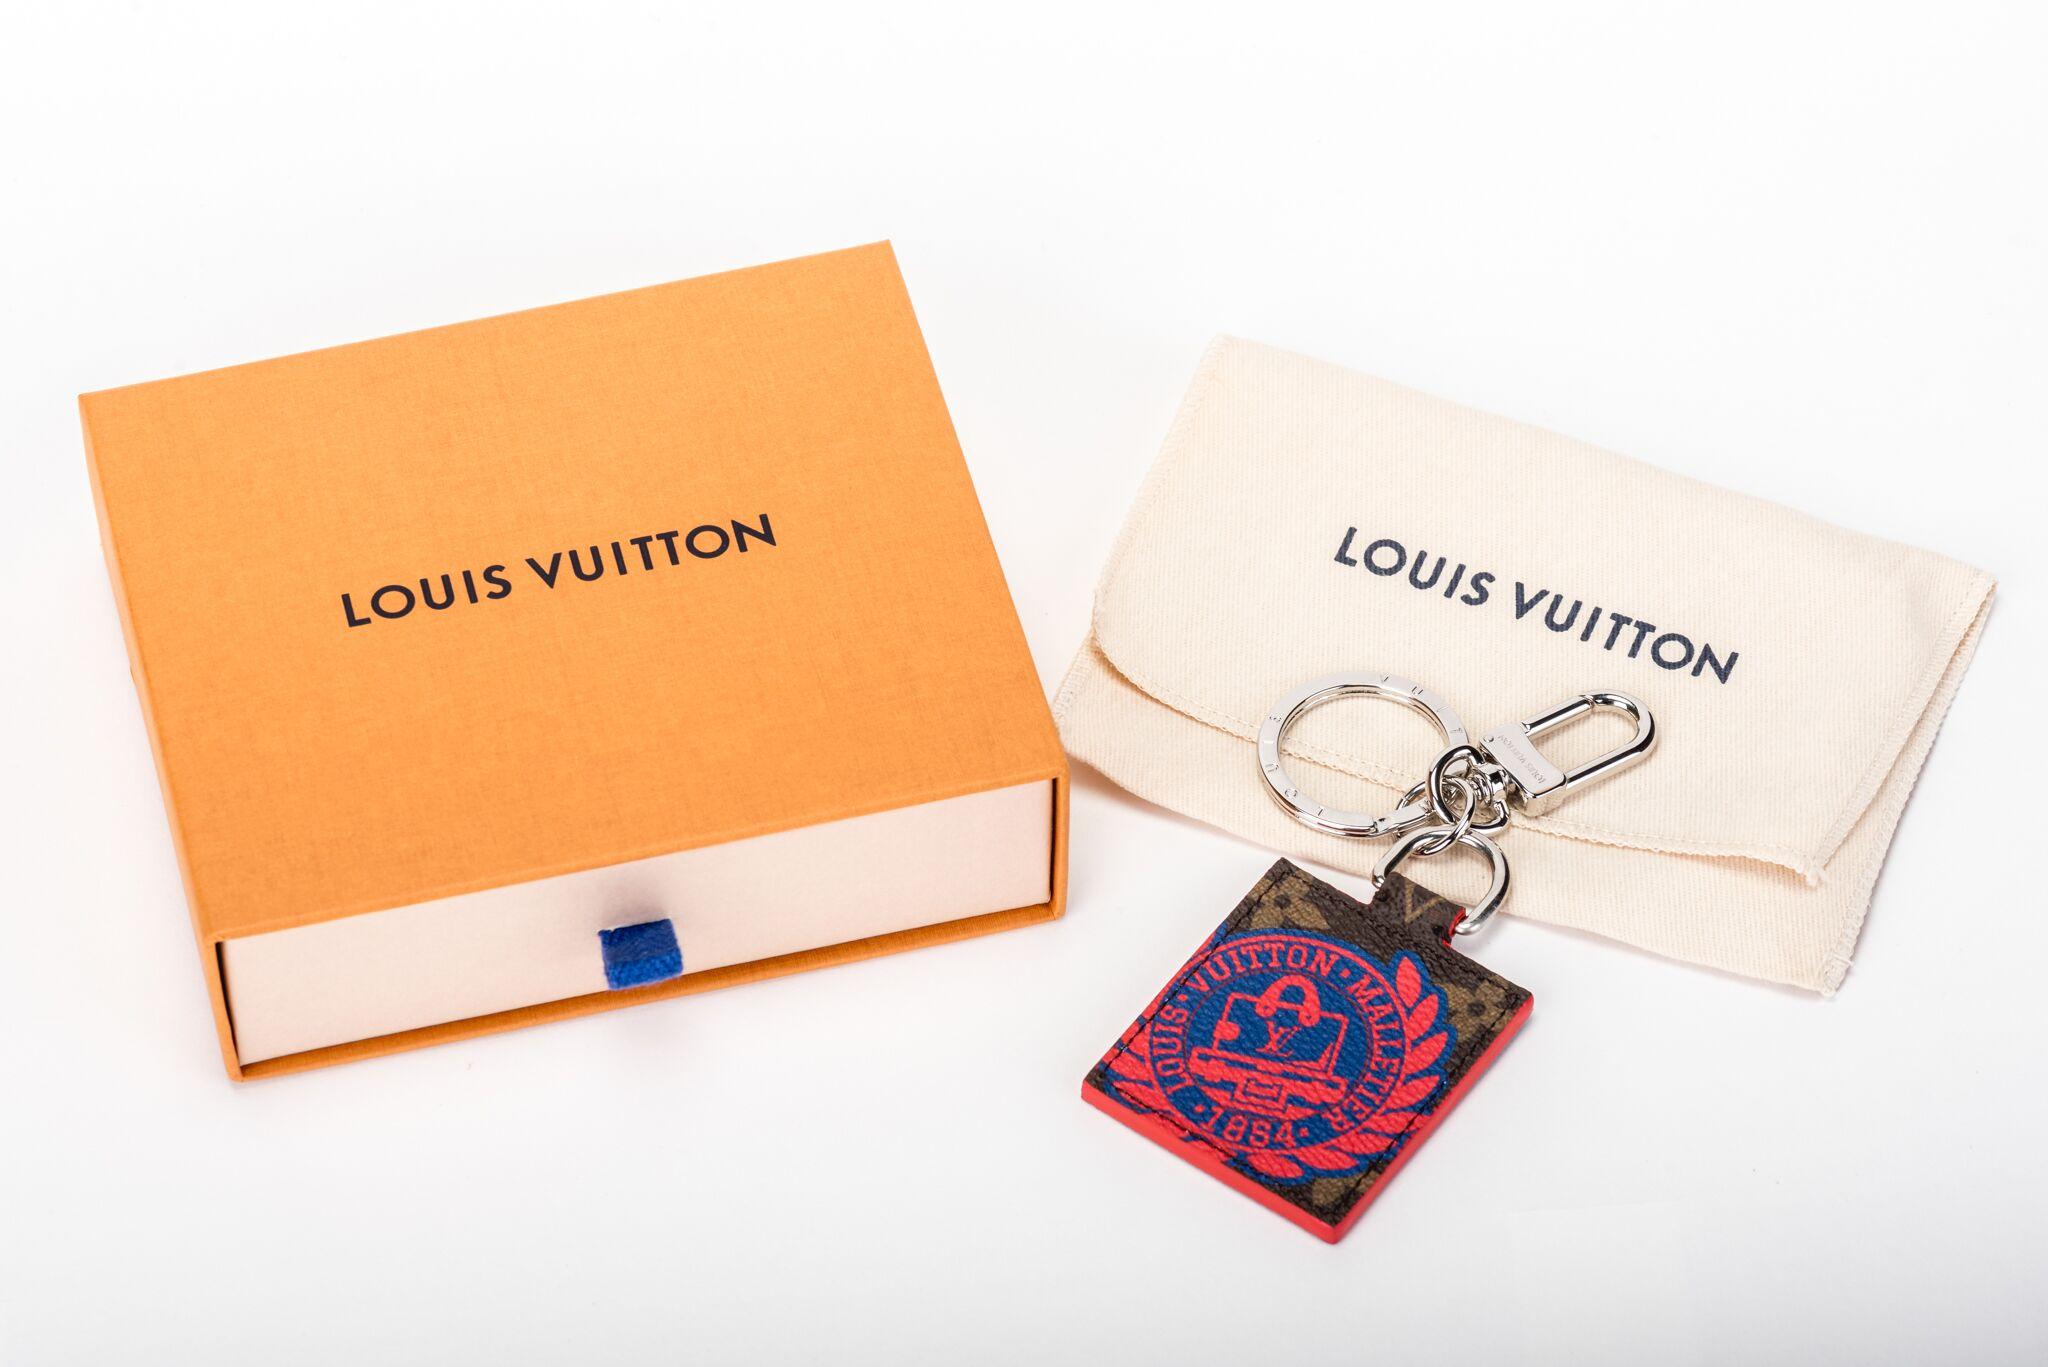 Louis Vuitton limited edition monogram bag charm with red-and-blue design. Brand new with dust cover and box.